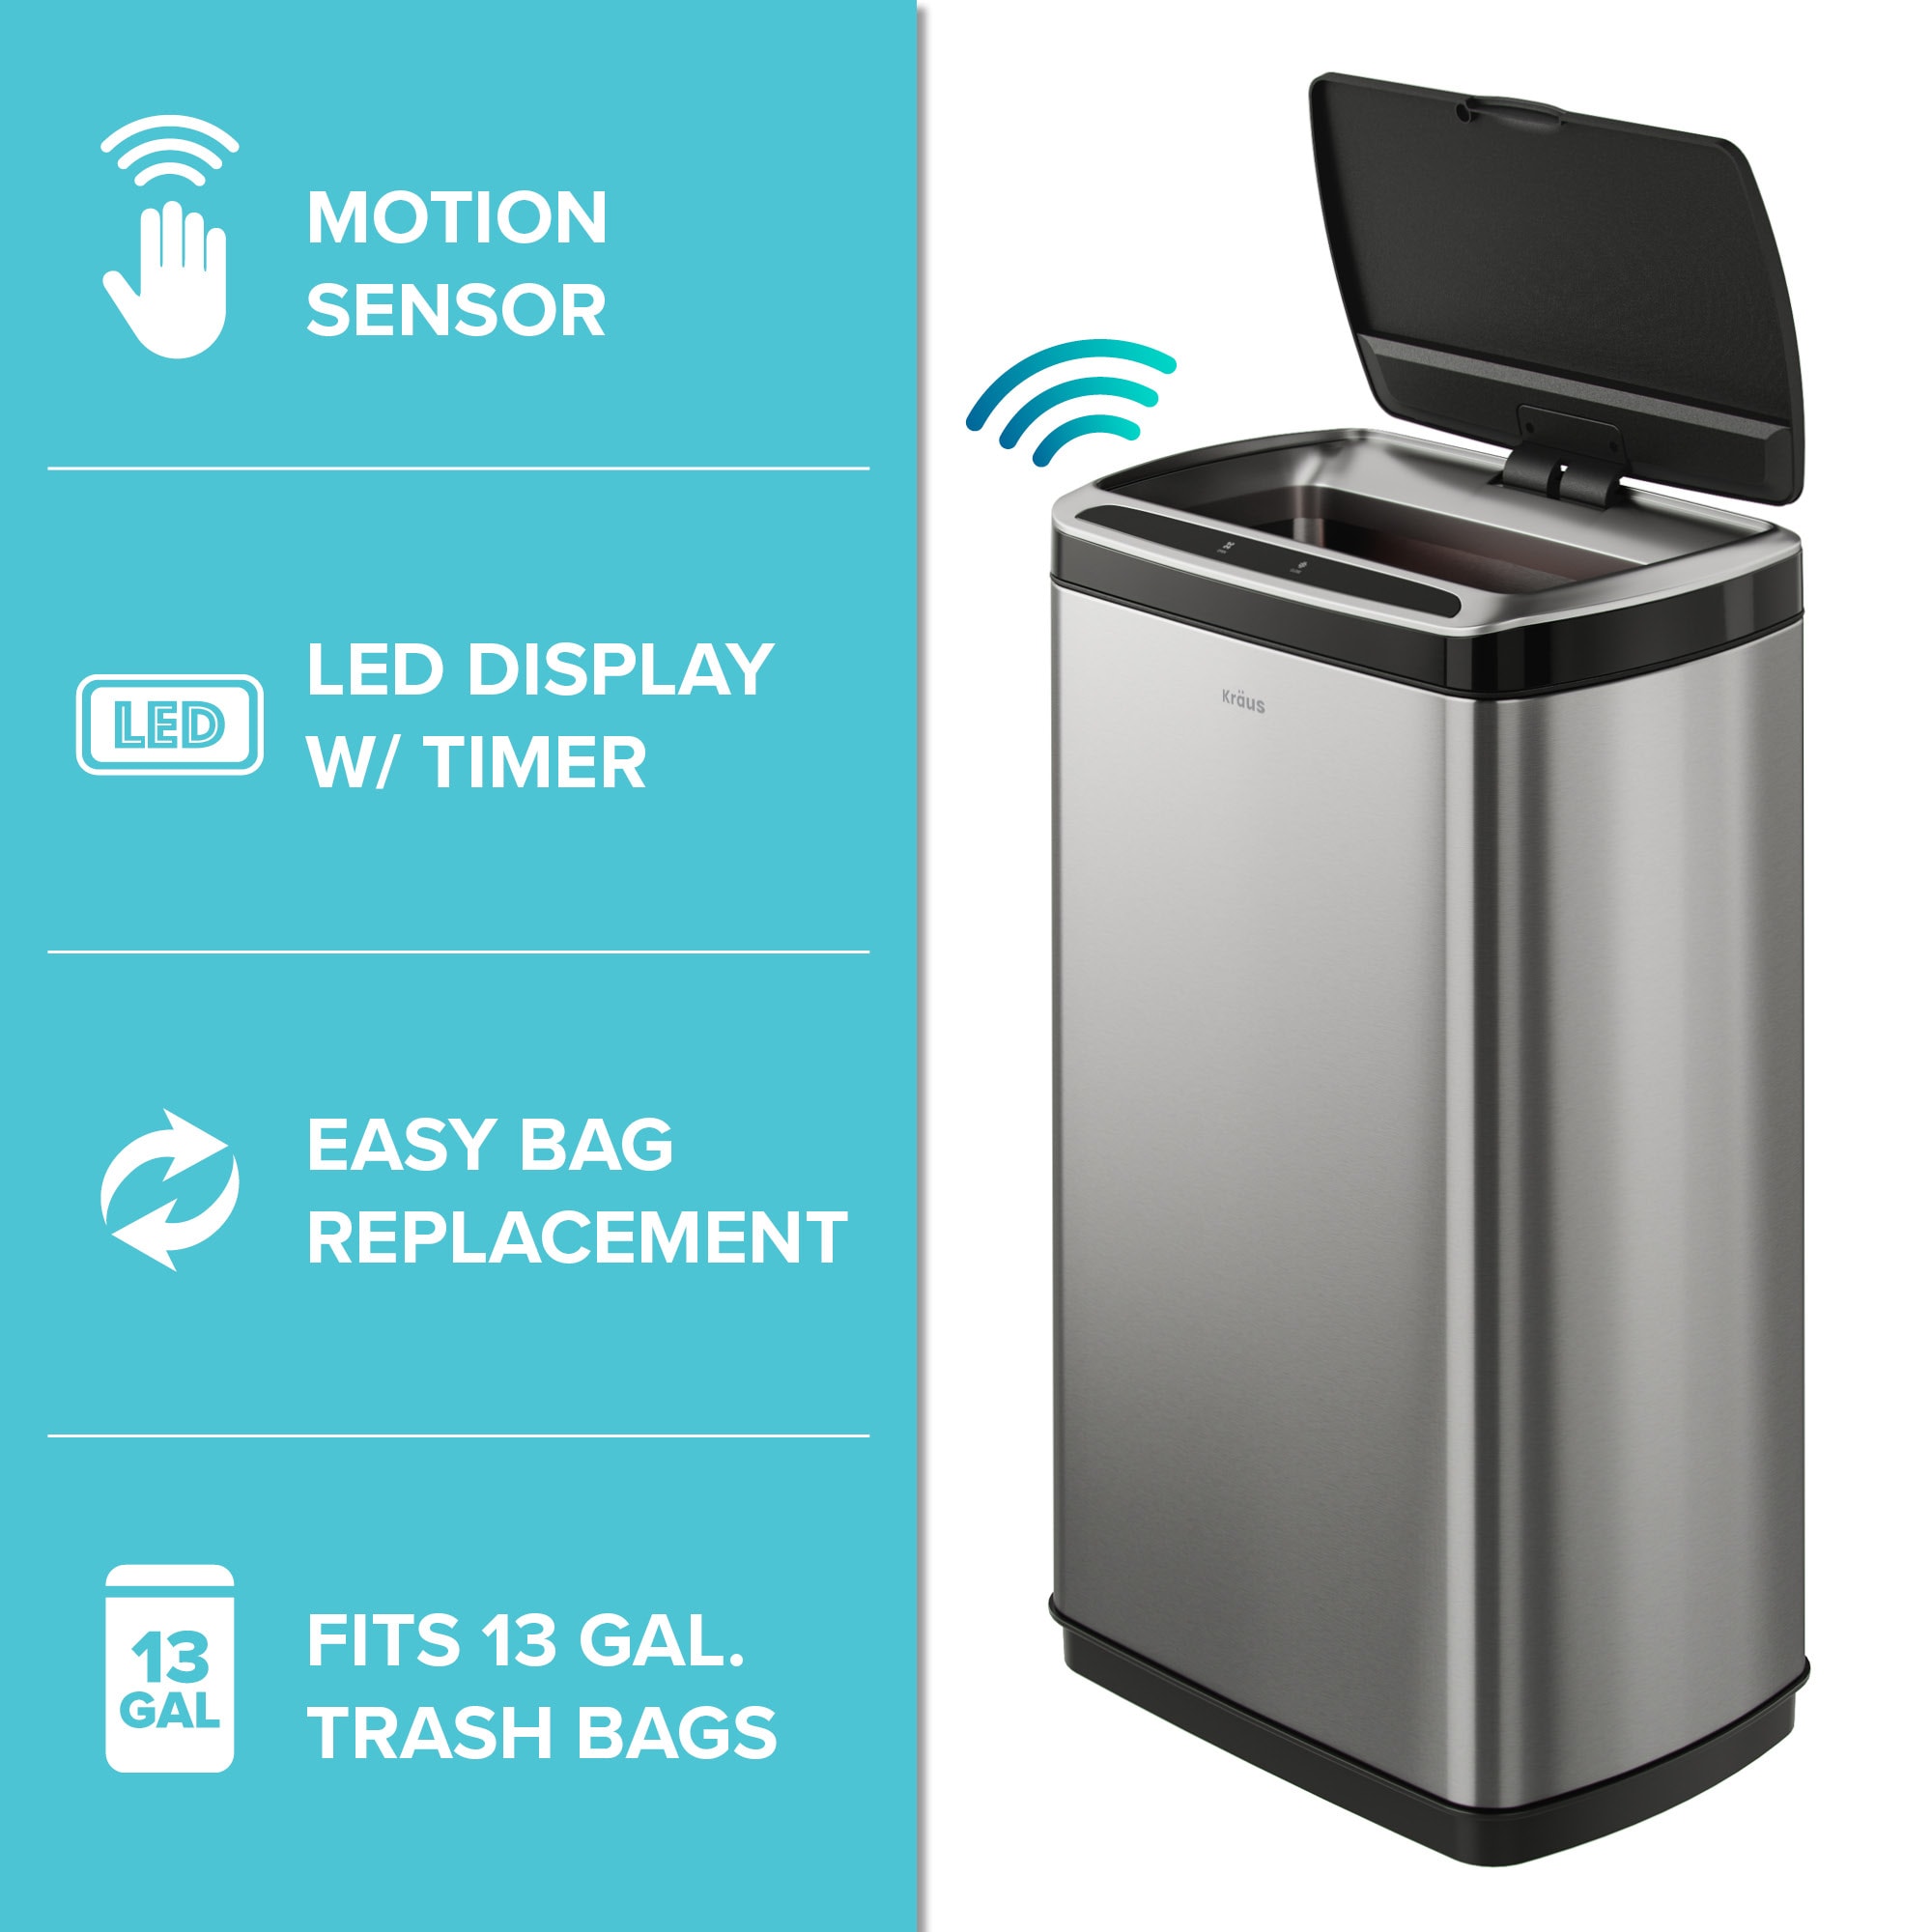 Dkeli Kitchen Trash Can 13 Gallon Garbage Can Automatic Sensor Waste Bin  Touchless Stainless Steel Trash Can with Lid for Home Bathroom Office,  Silver